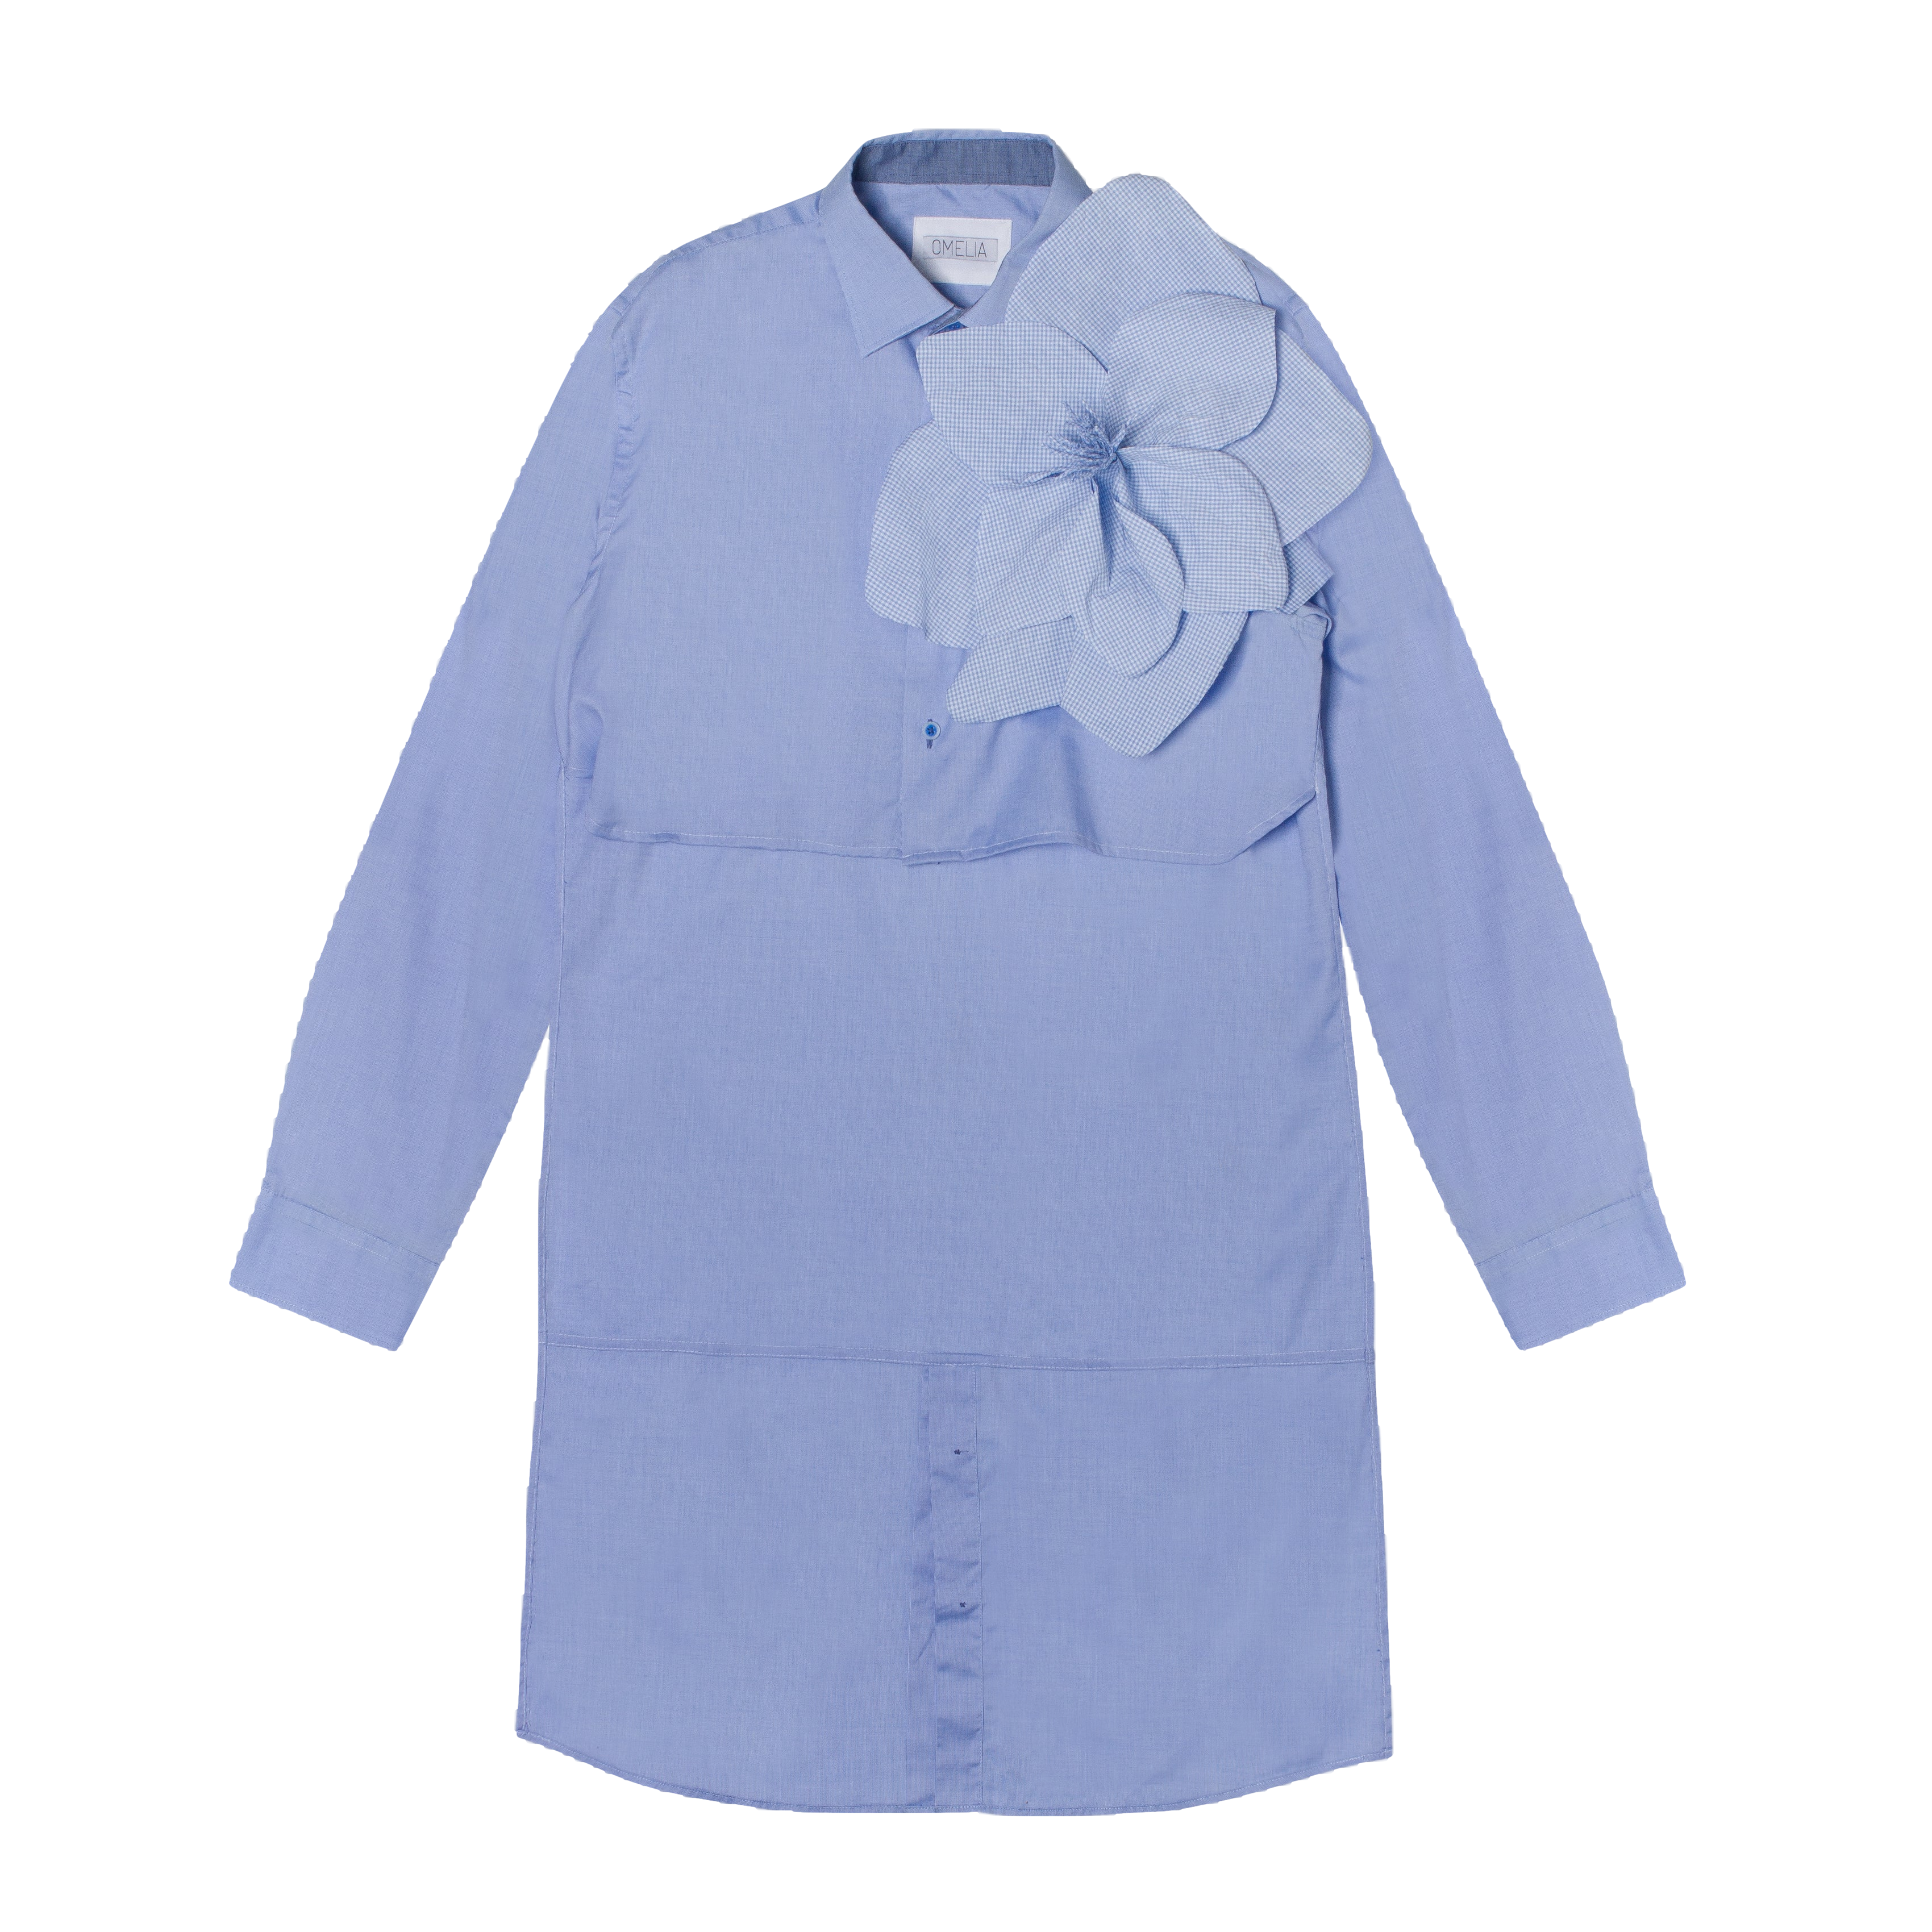 Omelia Redesigned Shirt 82 Blc In Blue